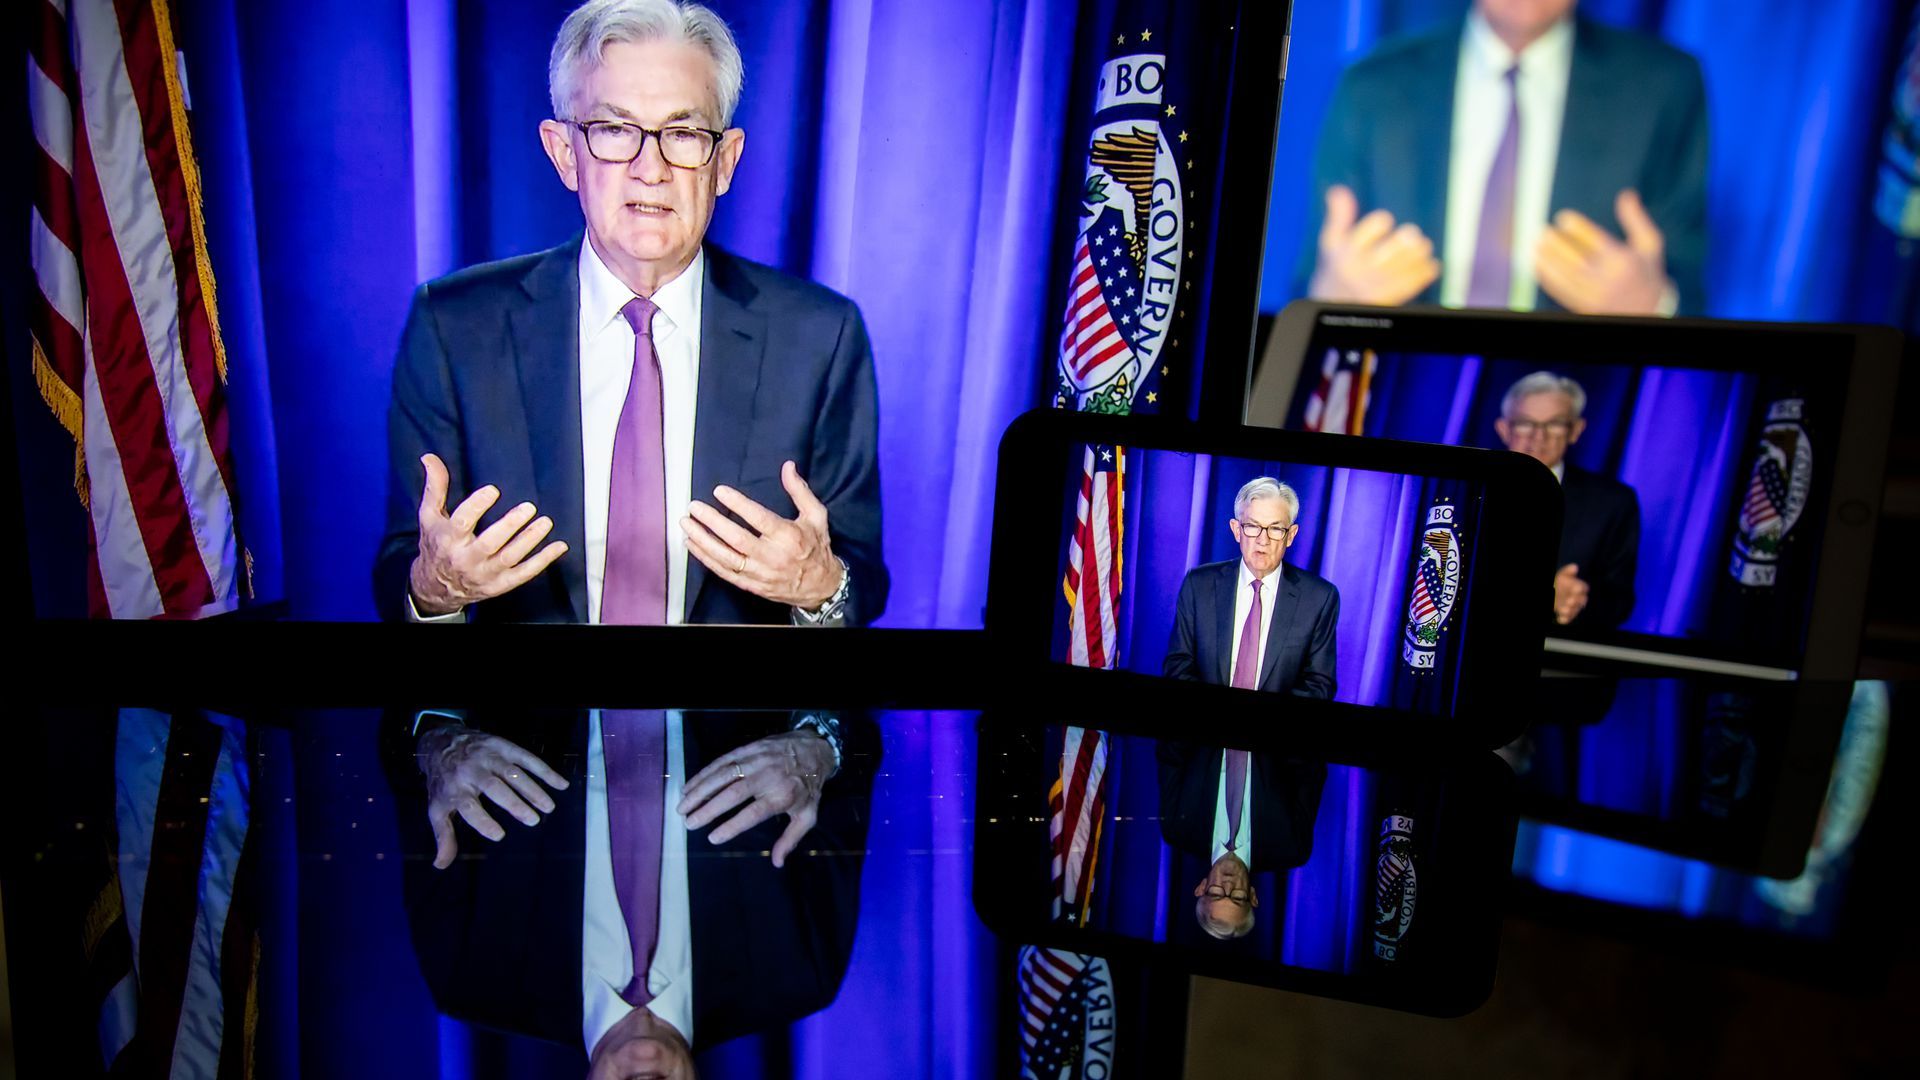 Jerome Powell; Photo: Michael Nagle/Bloomberg via Getty Images